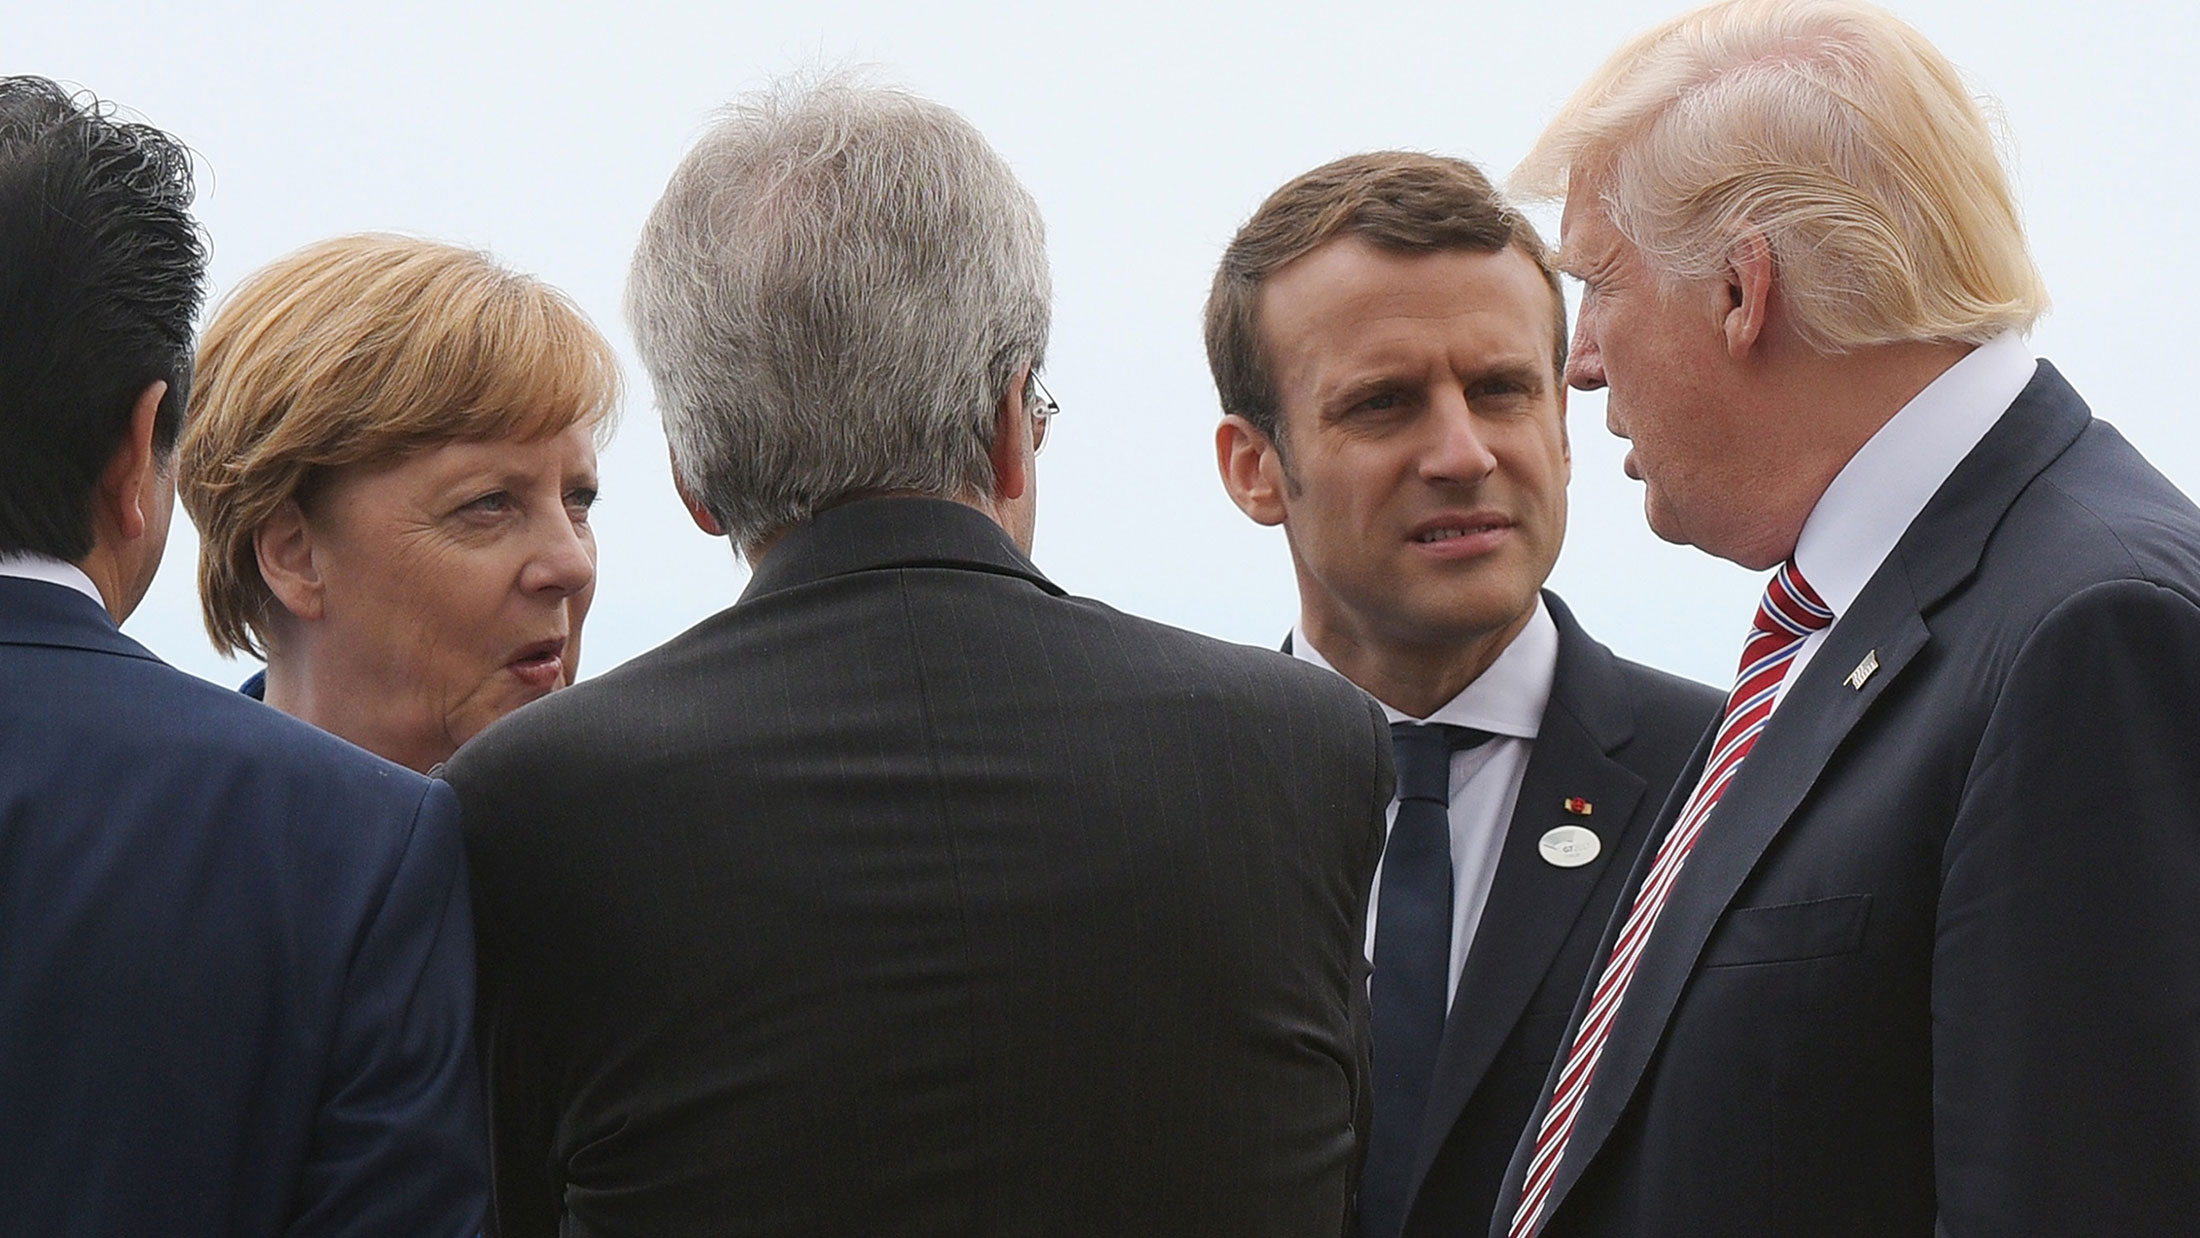 Merkel and Macron listen to Trump during a G7 summit on May 26.
